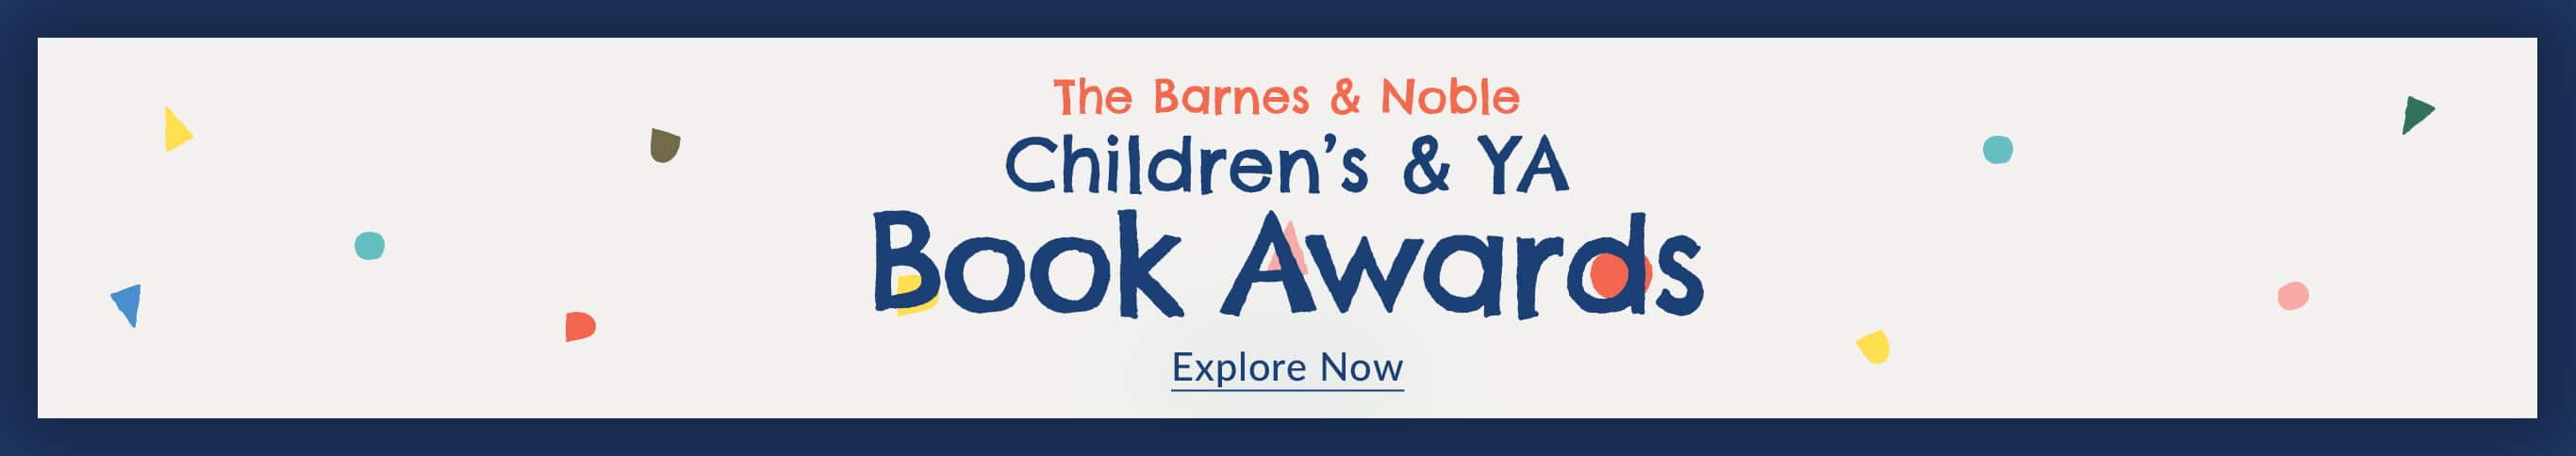 The Barnes & Noble Book Awards, Explore Now